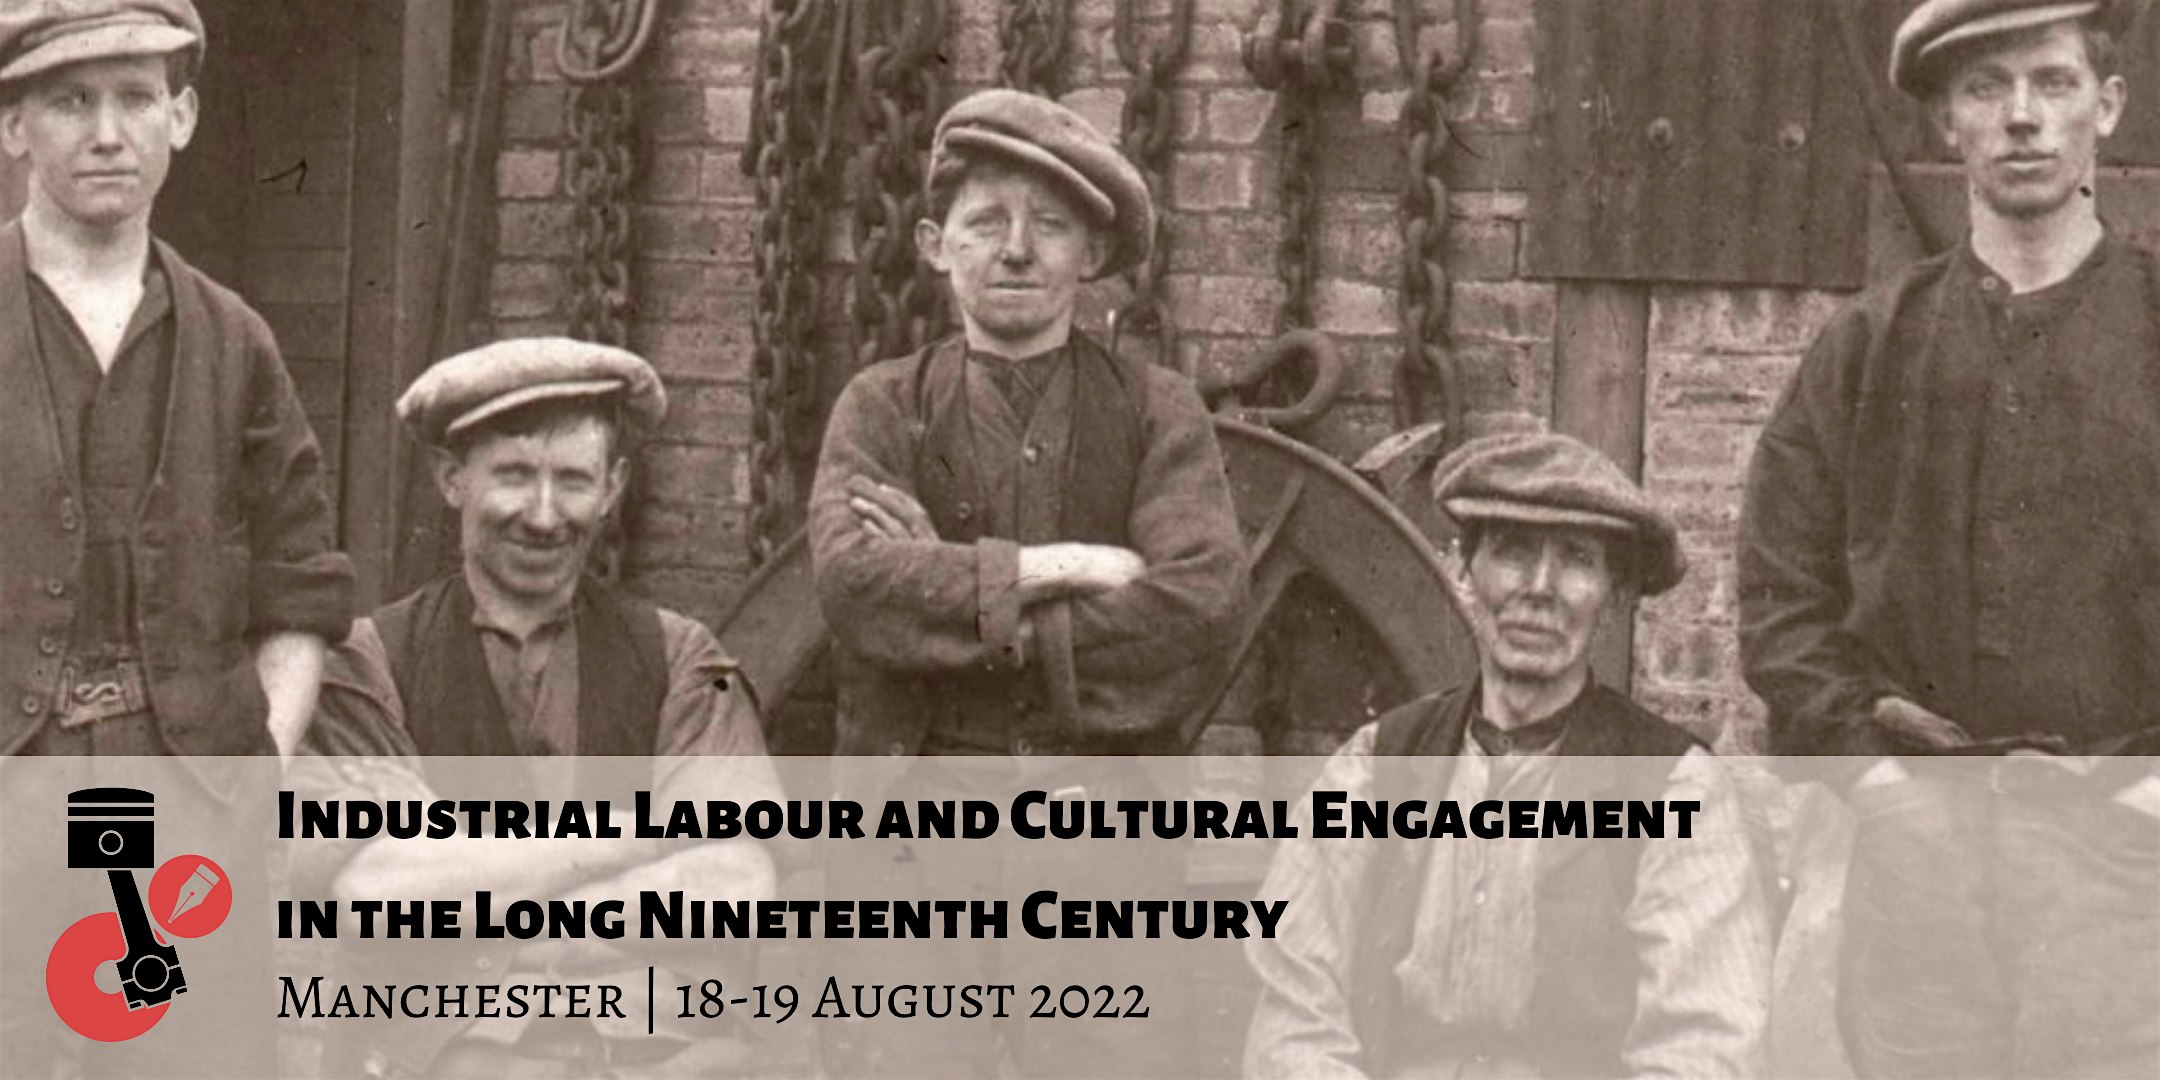 Industrial Labour and Cultural Engagement in the Long Nineteenth Century